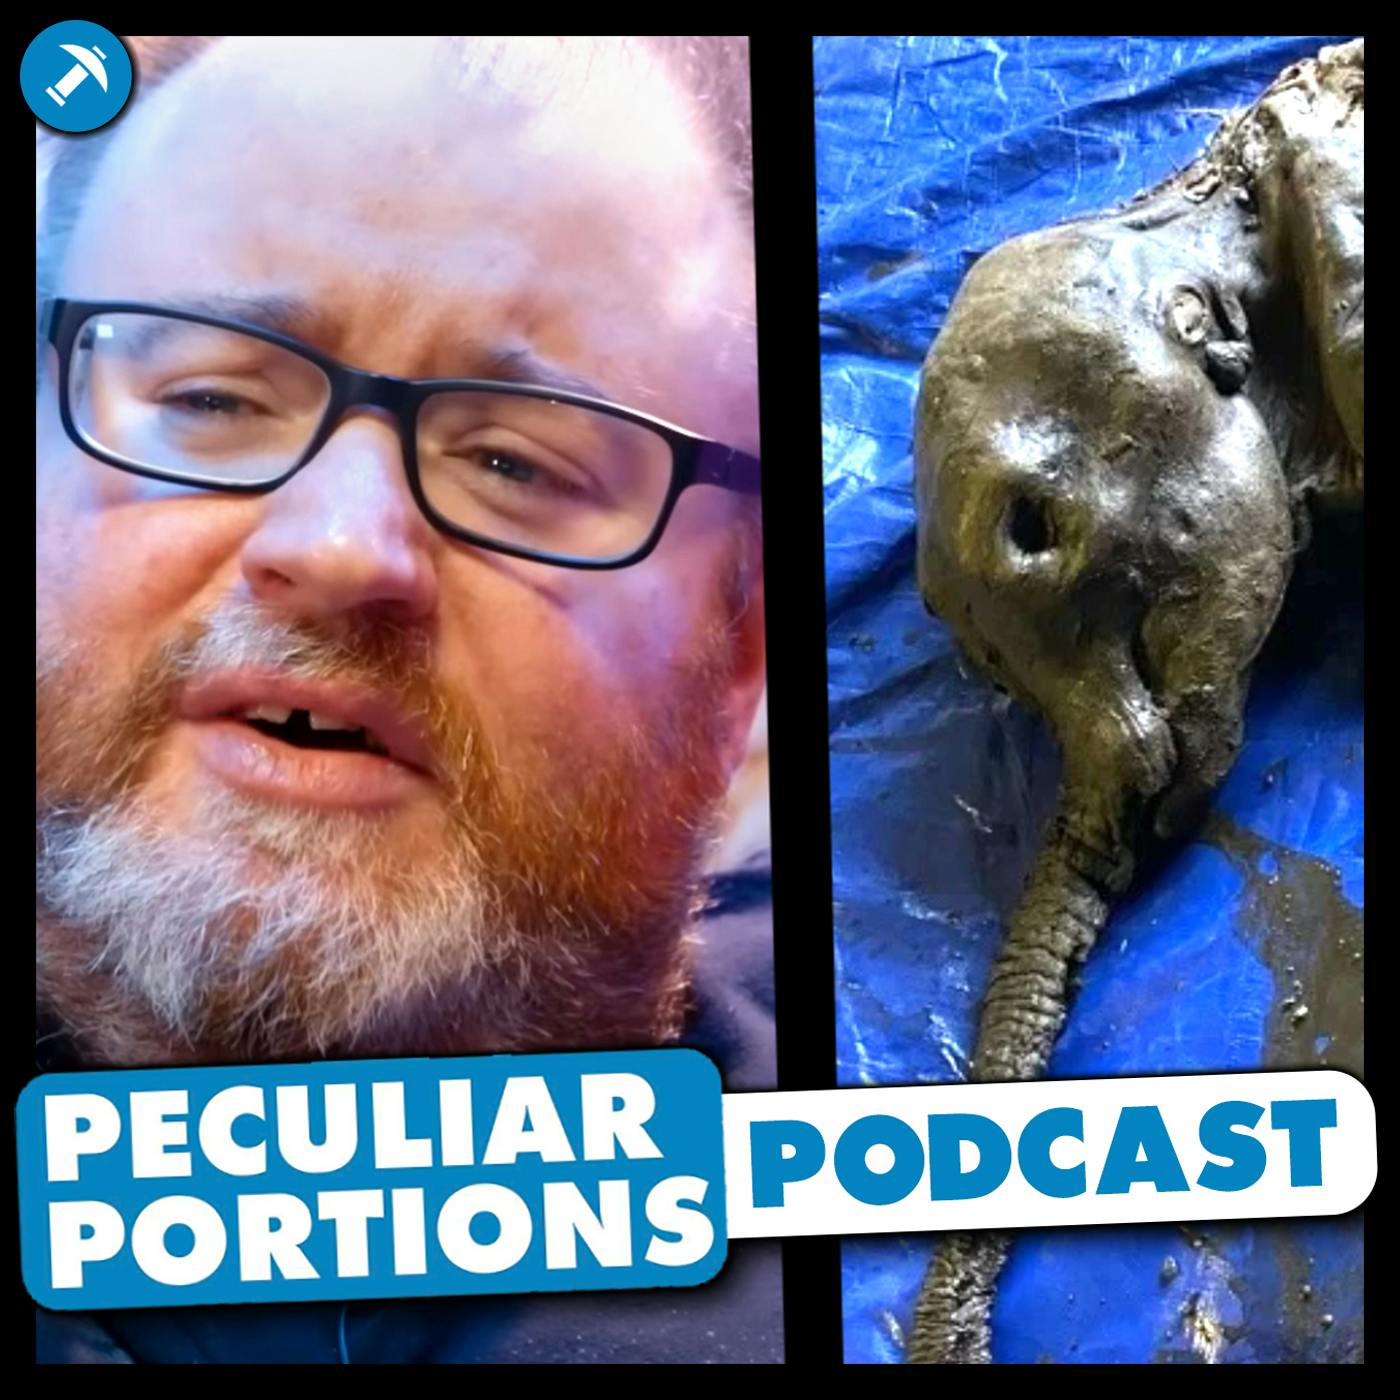 Man Finds Intact Woolly Mammoth - Peculiar Portions Podcast #62